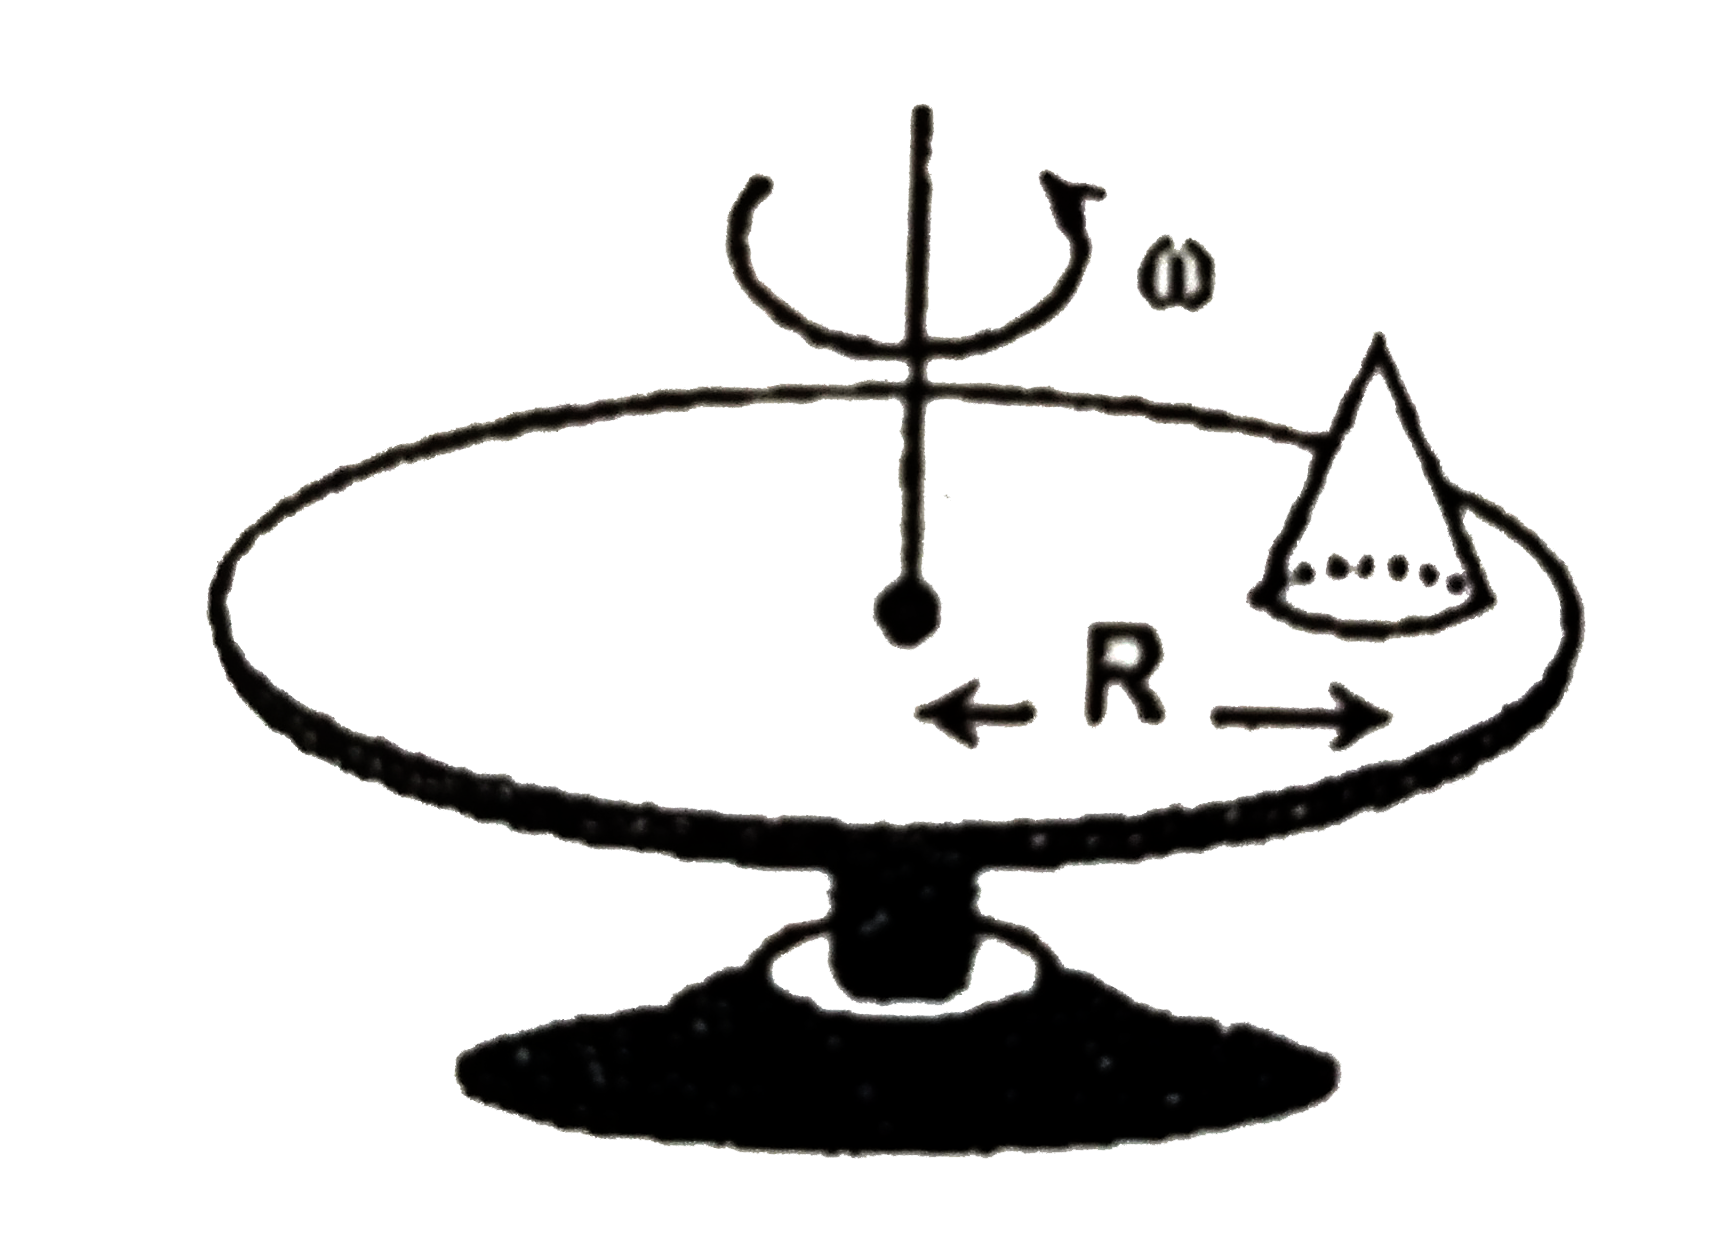 A cone of radius r and height h is kept on a turntable rotating with an angular velocity. The friction between te table and the cone is sufficient so that the cone does not slide. The distance between the axis of the cone and the axis of turntable is R(Rgtgtr). the maximum value of omega for which the cone does not topple is sqrt((xgr)/(Rh)), calculate x.